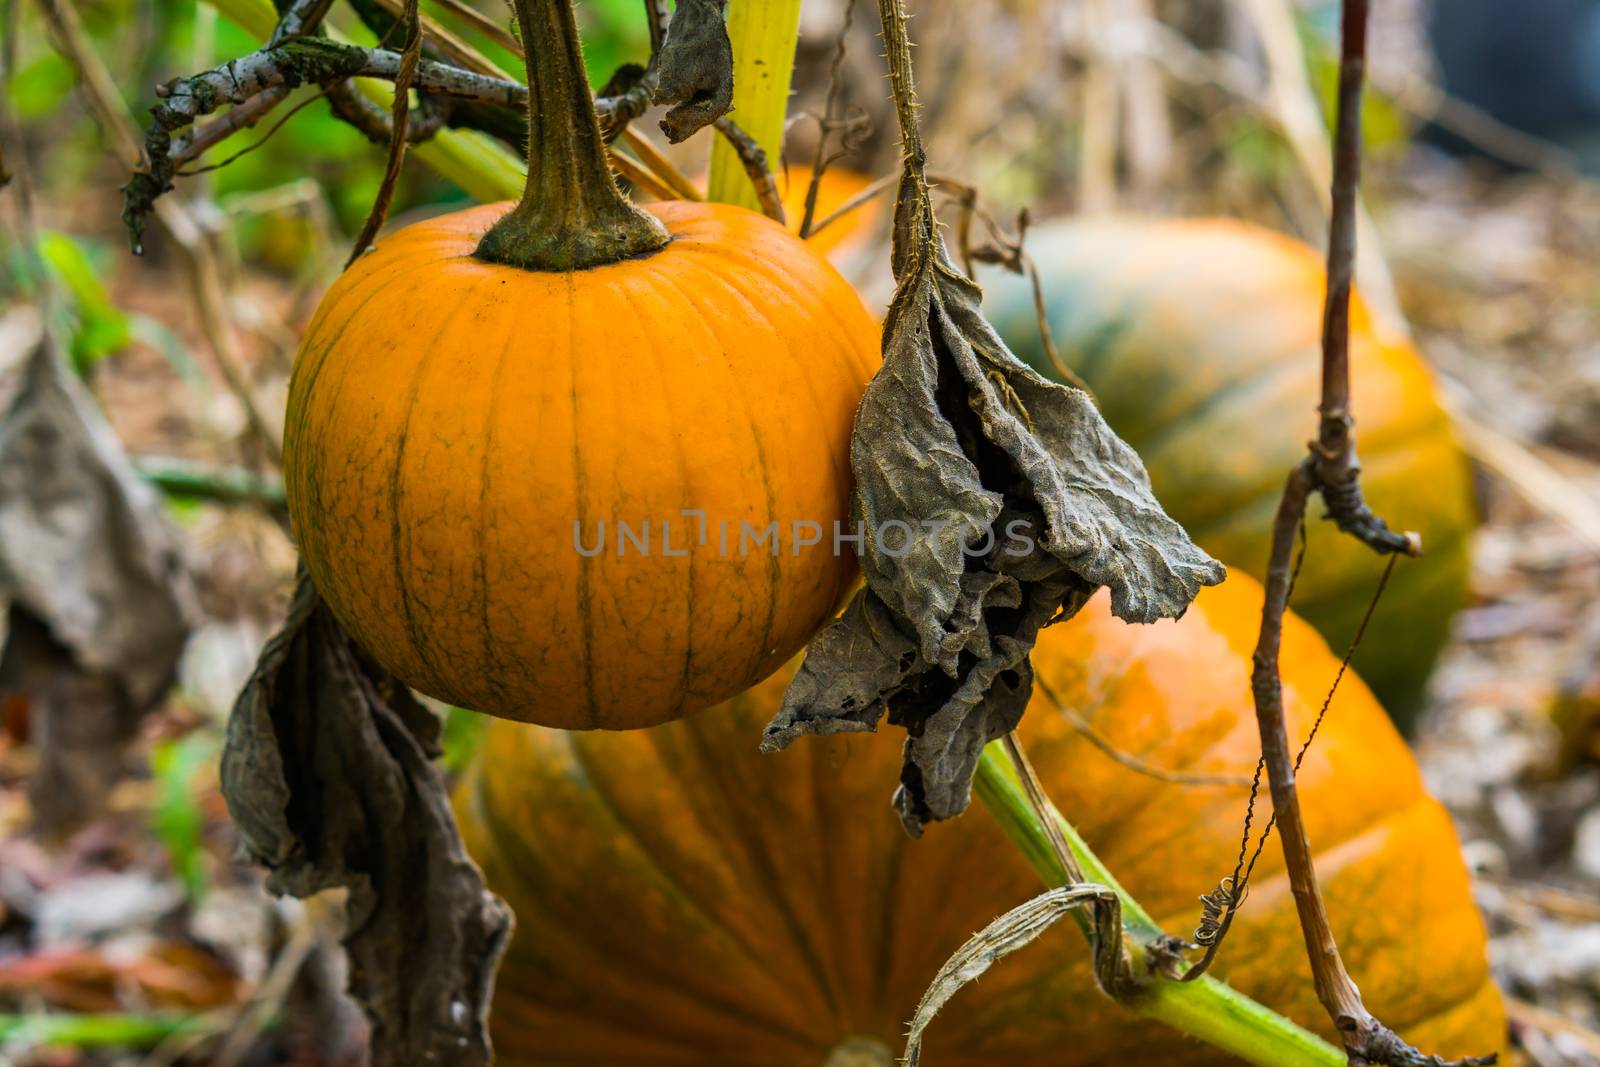 orange pumpkin hanging on the plant with 2 pumpkins in the background organic garden cultivation